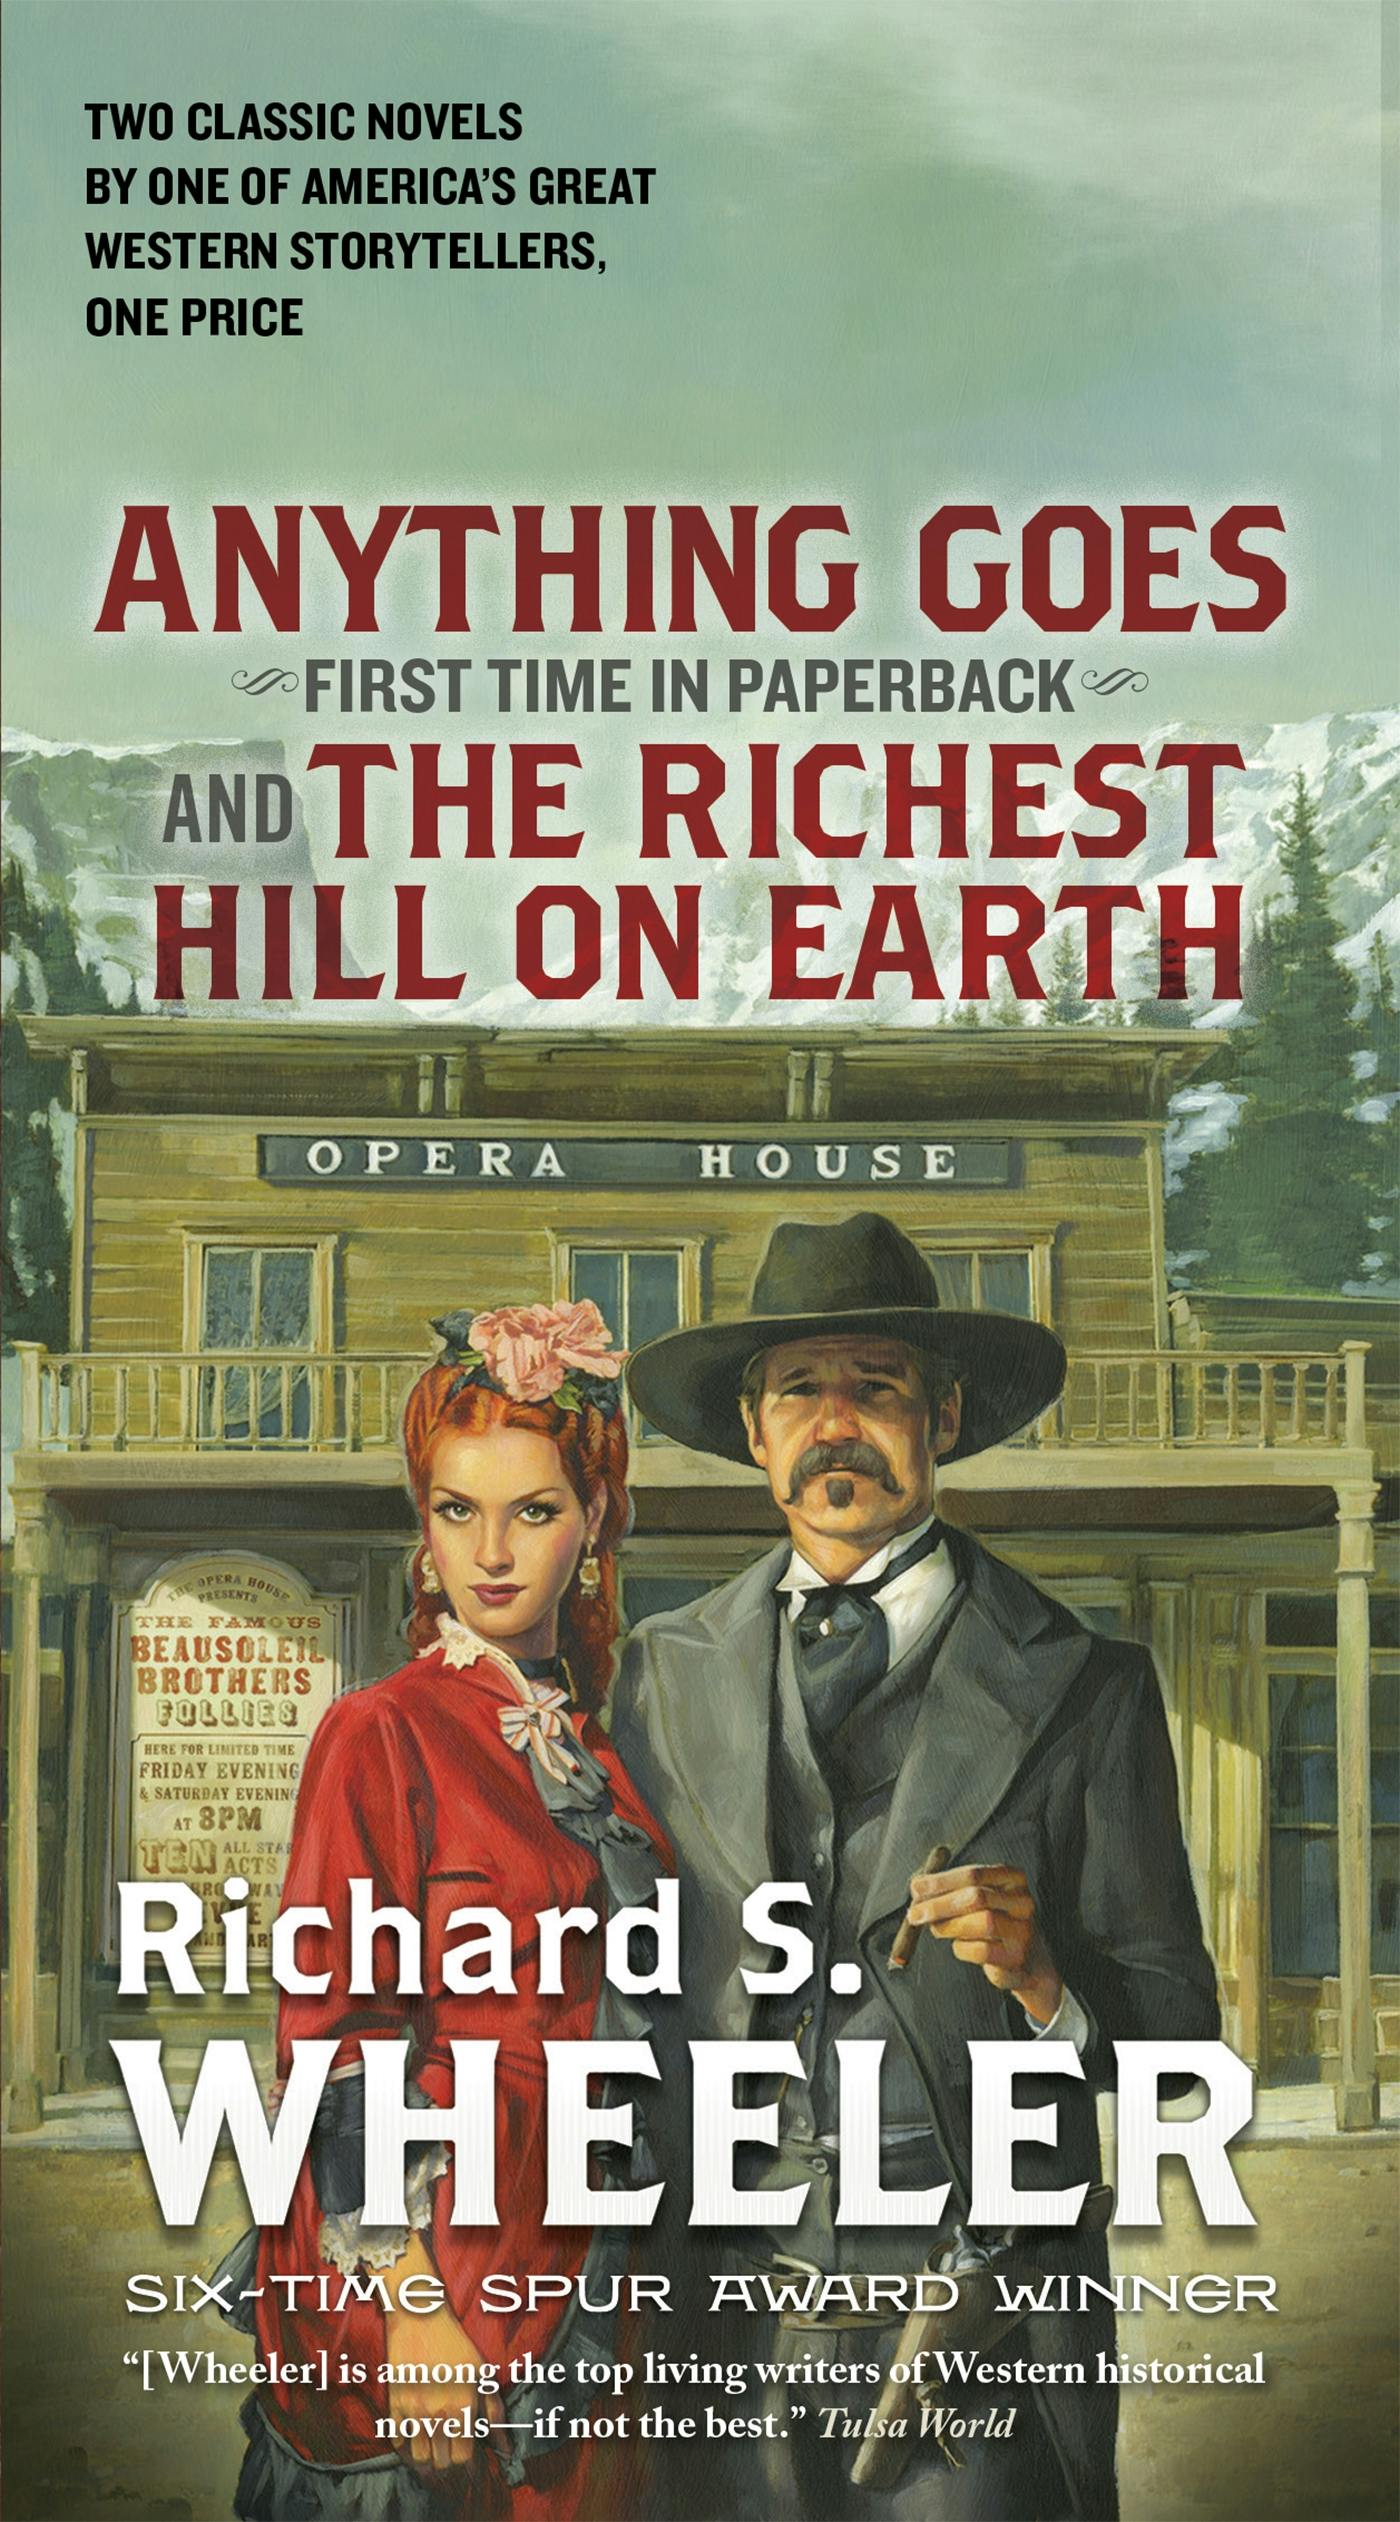 Cover for the book titled as: Anything Goes and The Richest Hill on Earth